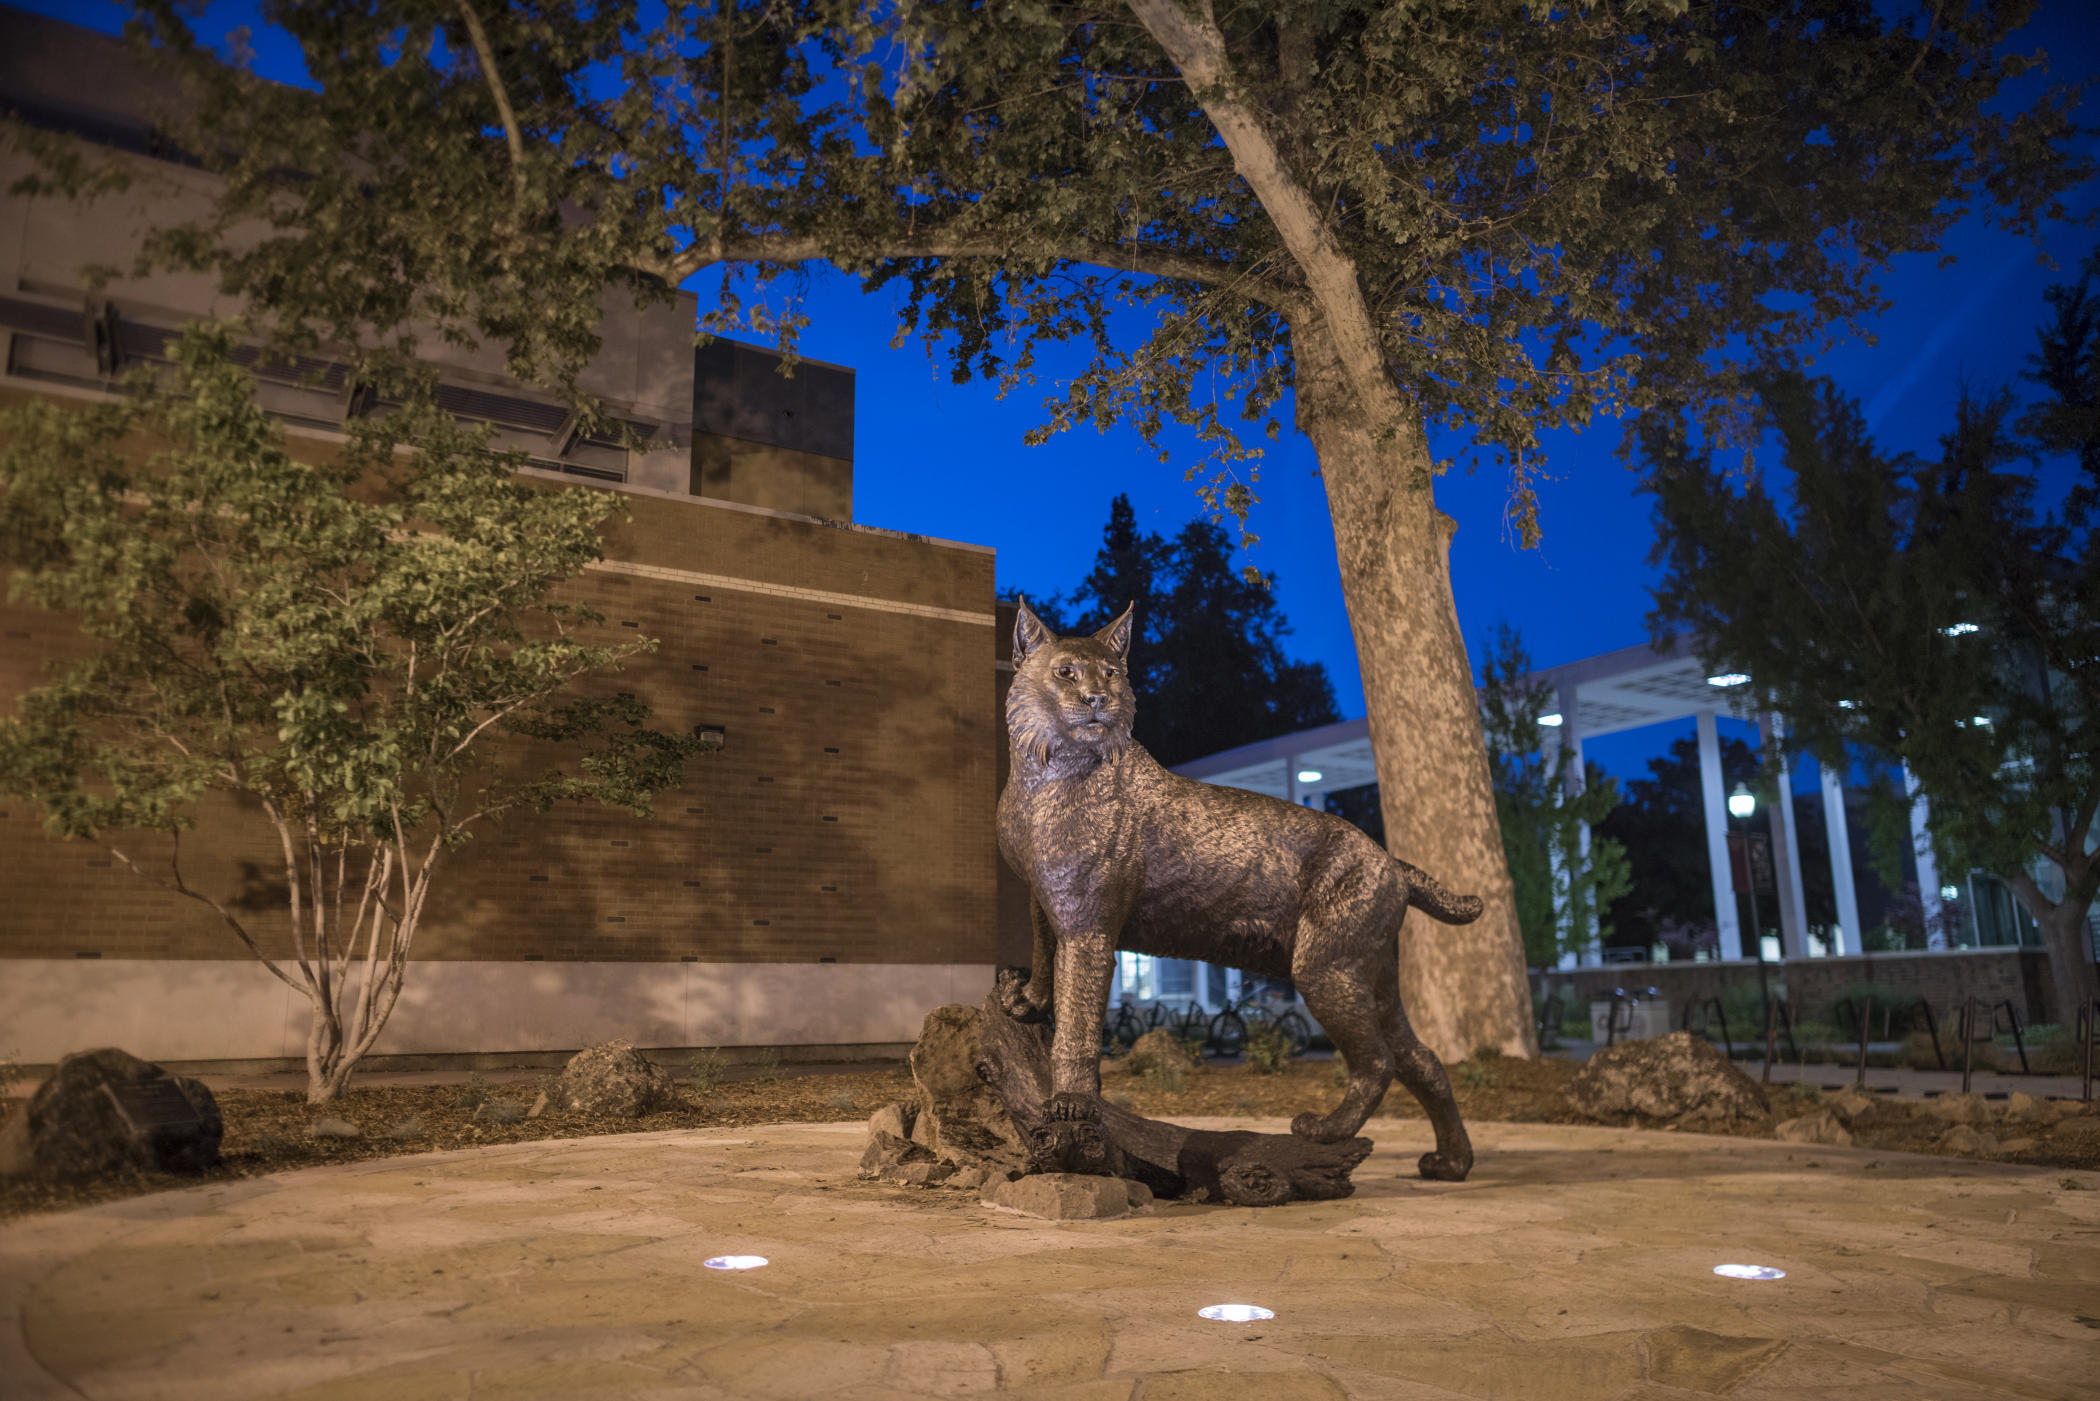 The Wildcat Statue, perched in front of Wildcat Plaza and designed by Washington-based artist Matthew Gray Parker, was unveiled in April 2018.